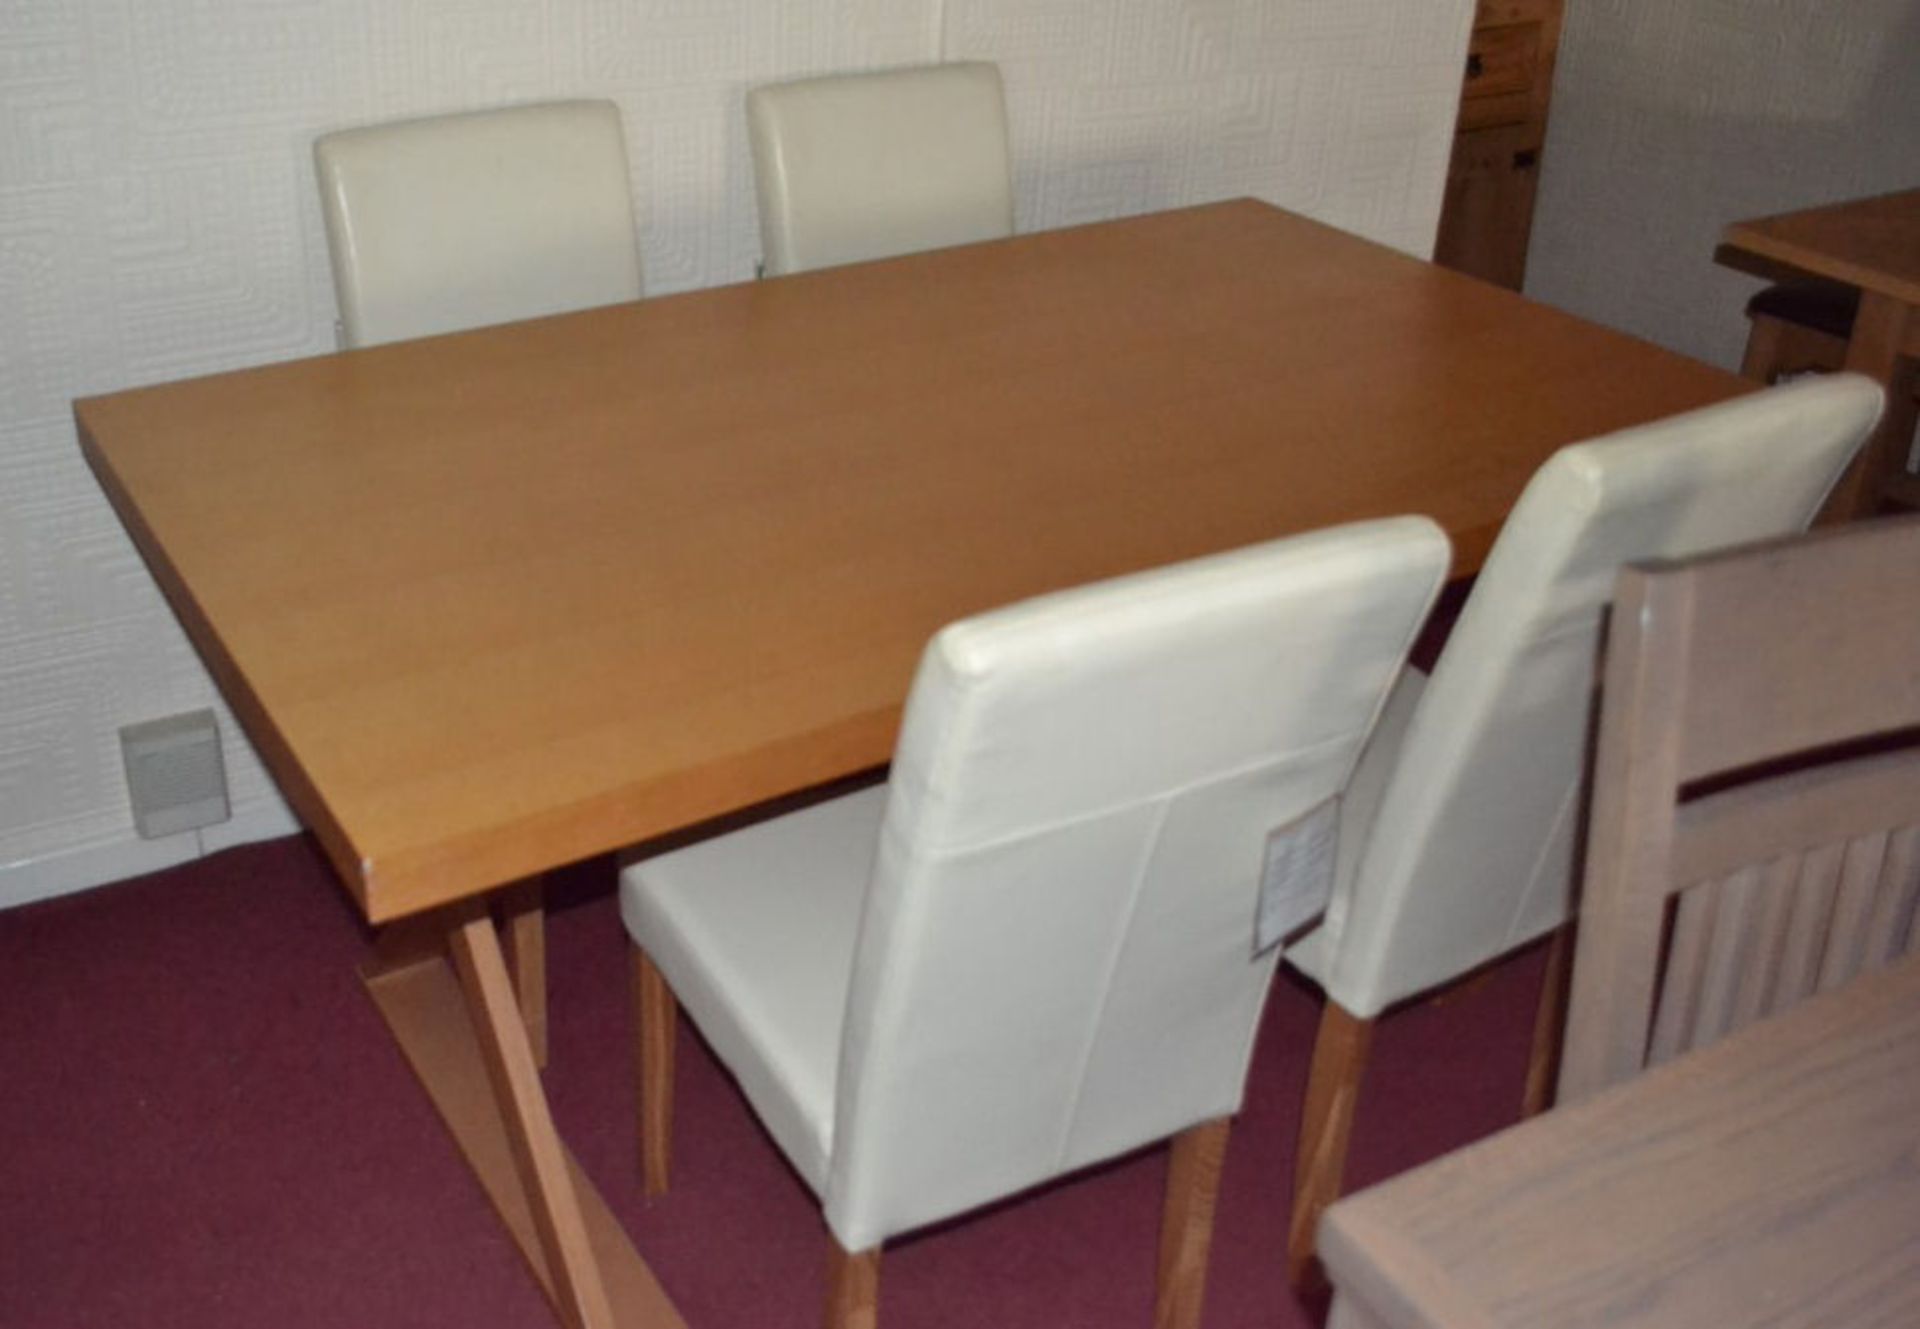 1 x Dining Table With 4 Cream Chairs. Length 160cm, Width 90cm, Height 77cm. - Image 3 of 5